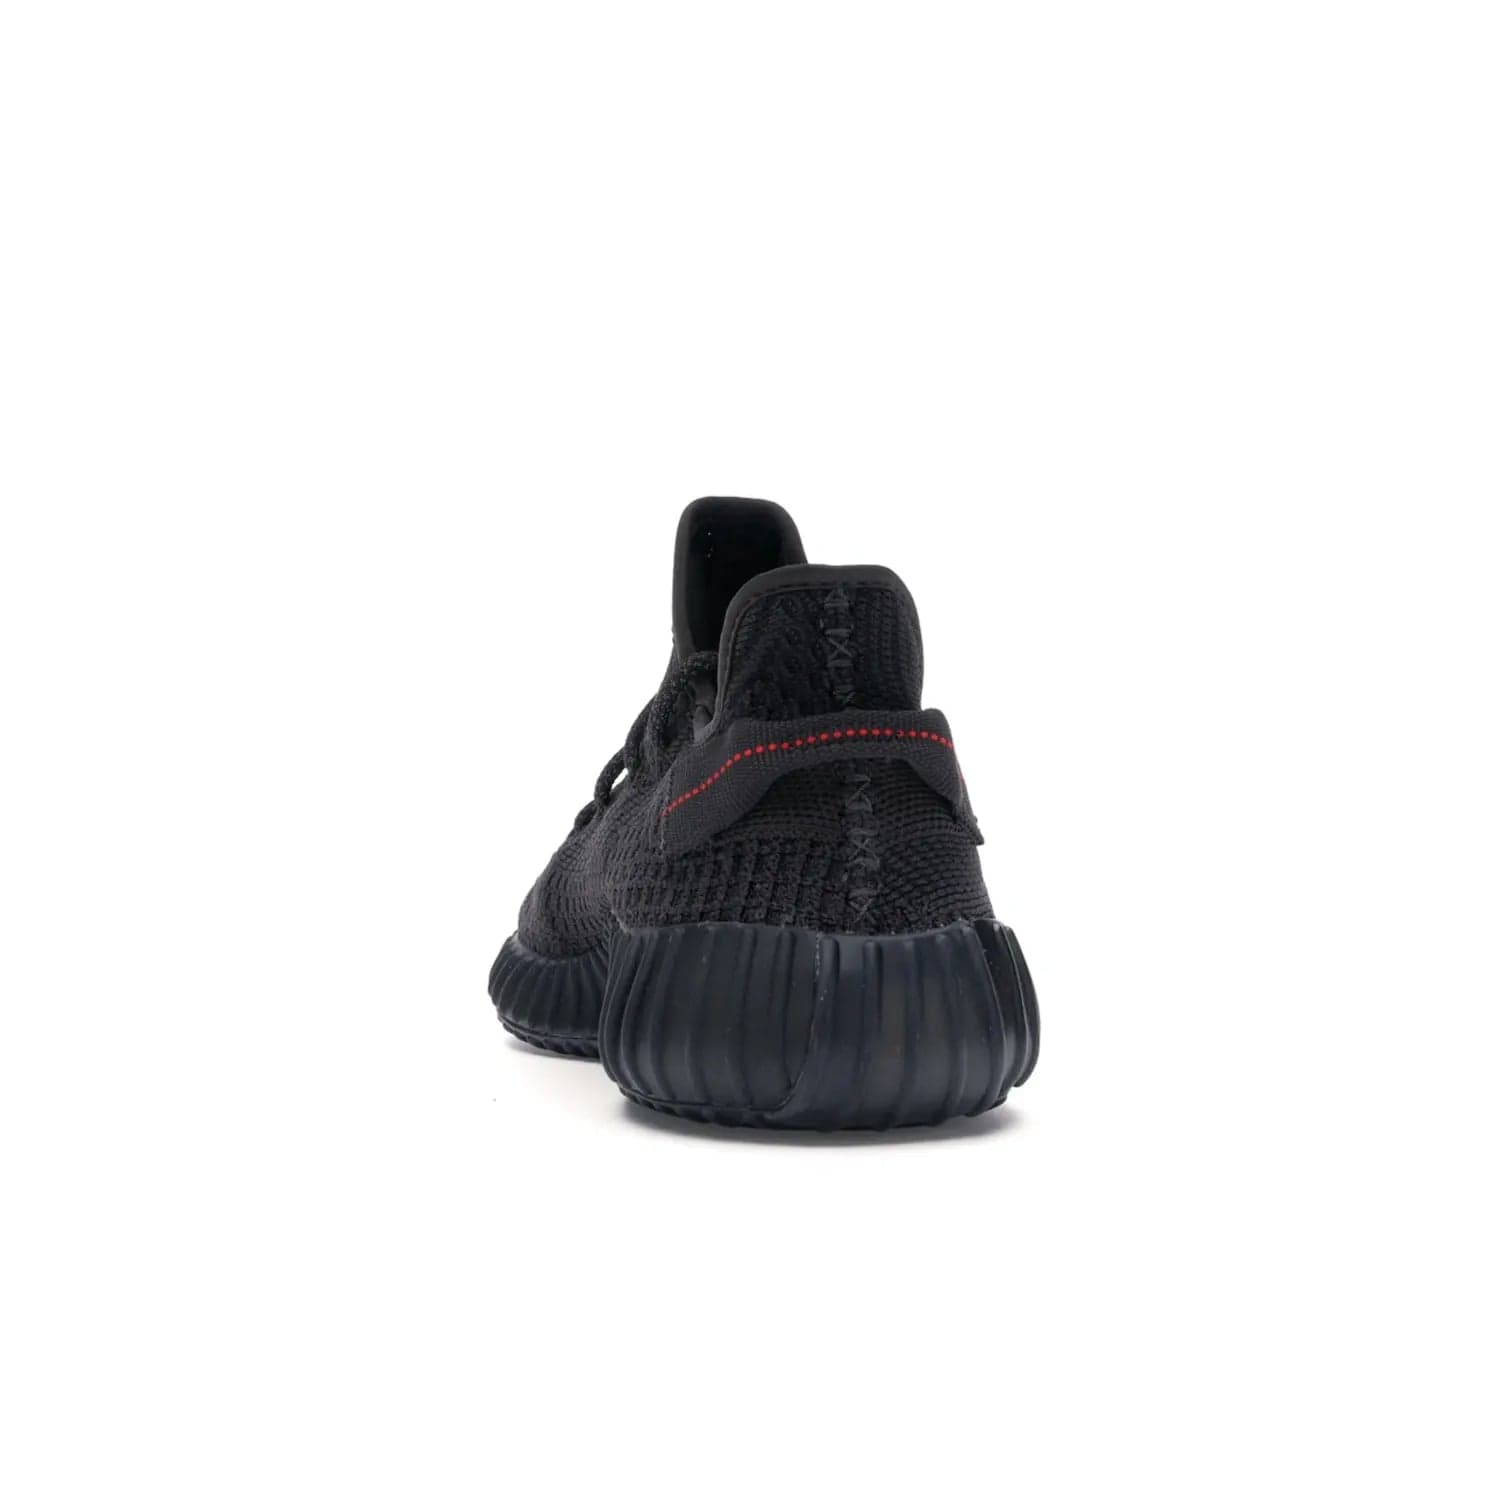 adidas Yeezy Boost 350 V2 Black (Non-Reflective) - Image 27 - Only at www.BallersClubKickz.com - A timeless, sleek silhouette crafted from quality materials. The adidas Yeezy Boost 350 V2 Black (Non-Reflective) brings style and sophistication. Get yours now!